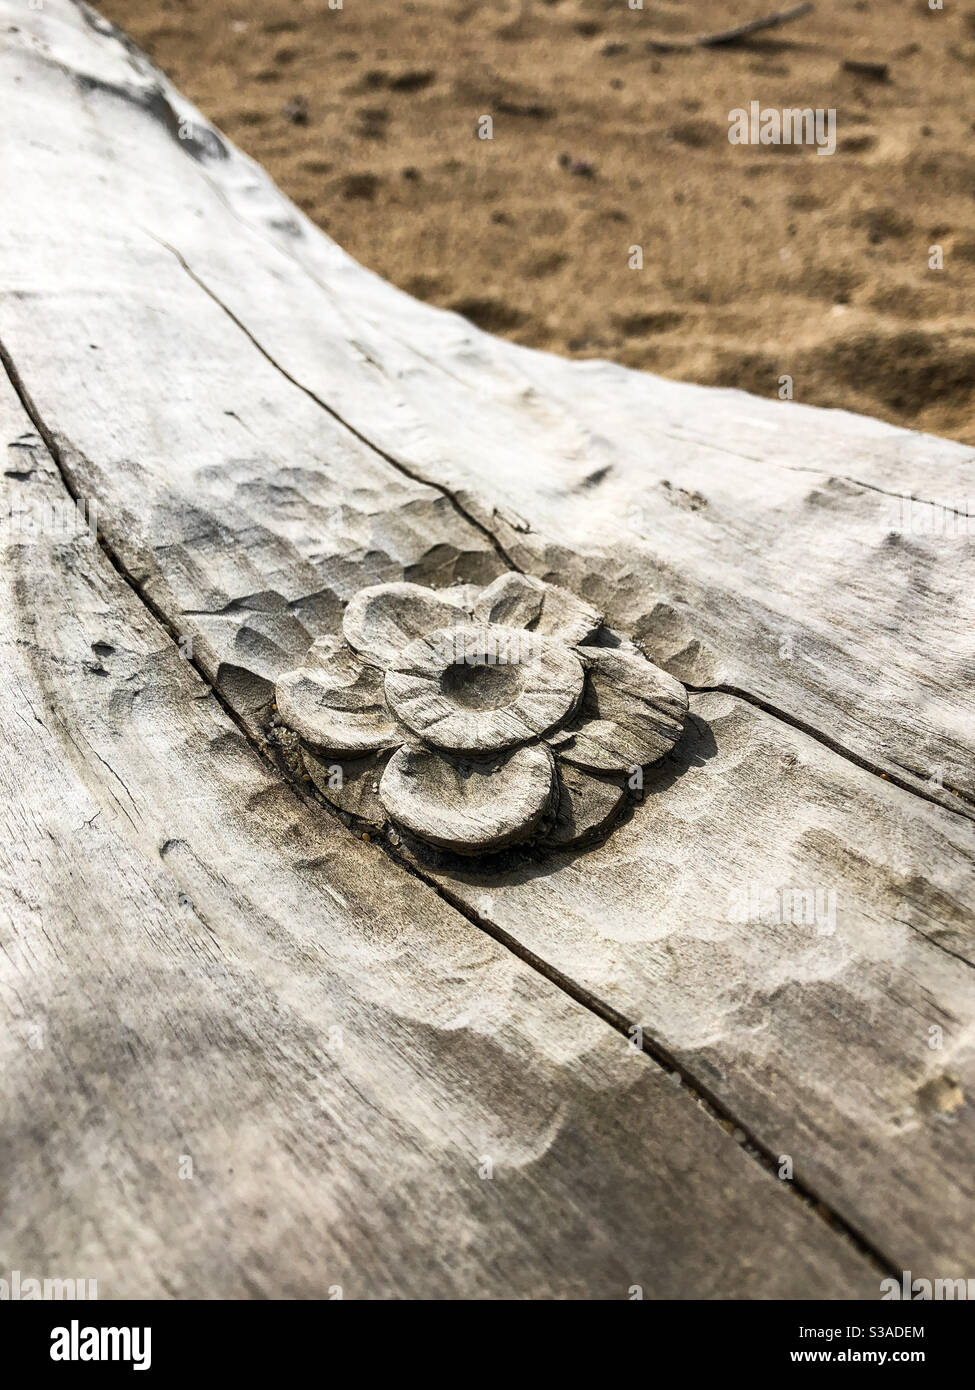 Flower carved by hand out of a piece of wood that washed up on the beach. Stock Photo